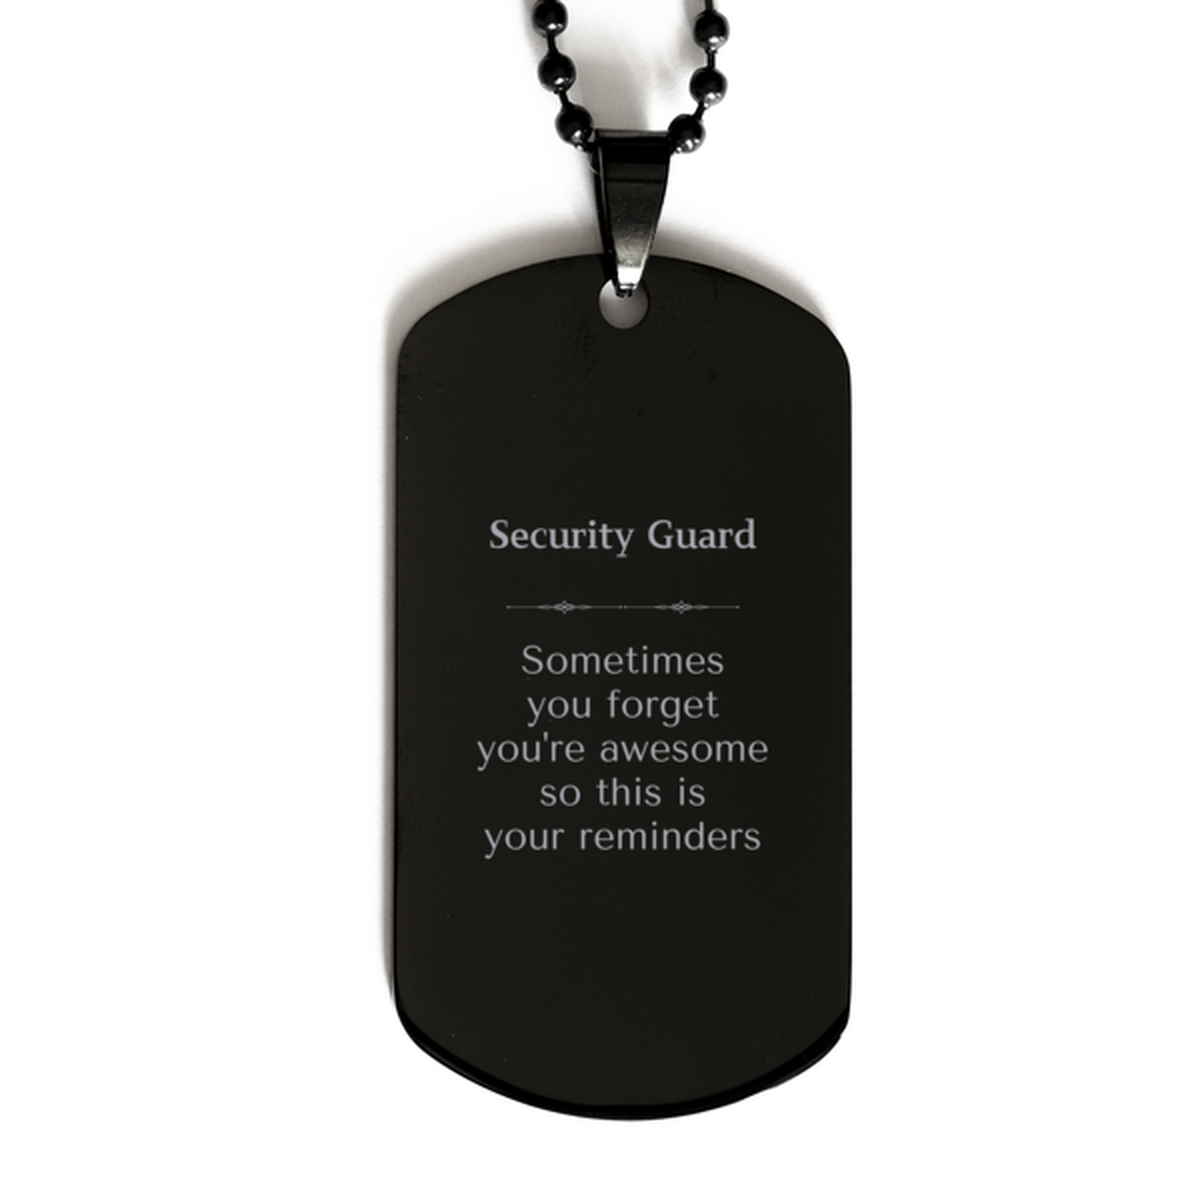 Sentimental Security Guard Black Dog Tag, Security Guard Sometimes you forget you're awesome so this is your reminders, Graduation Christmas Birthday Gifts for Security Guard, Men, Women, Coworkers